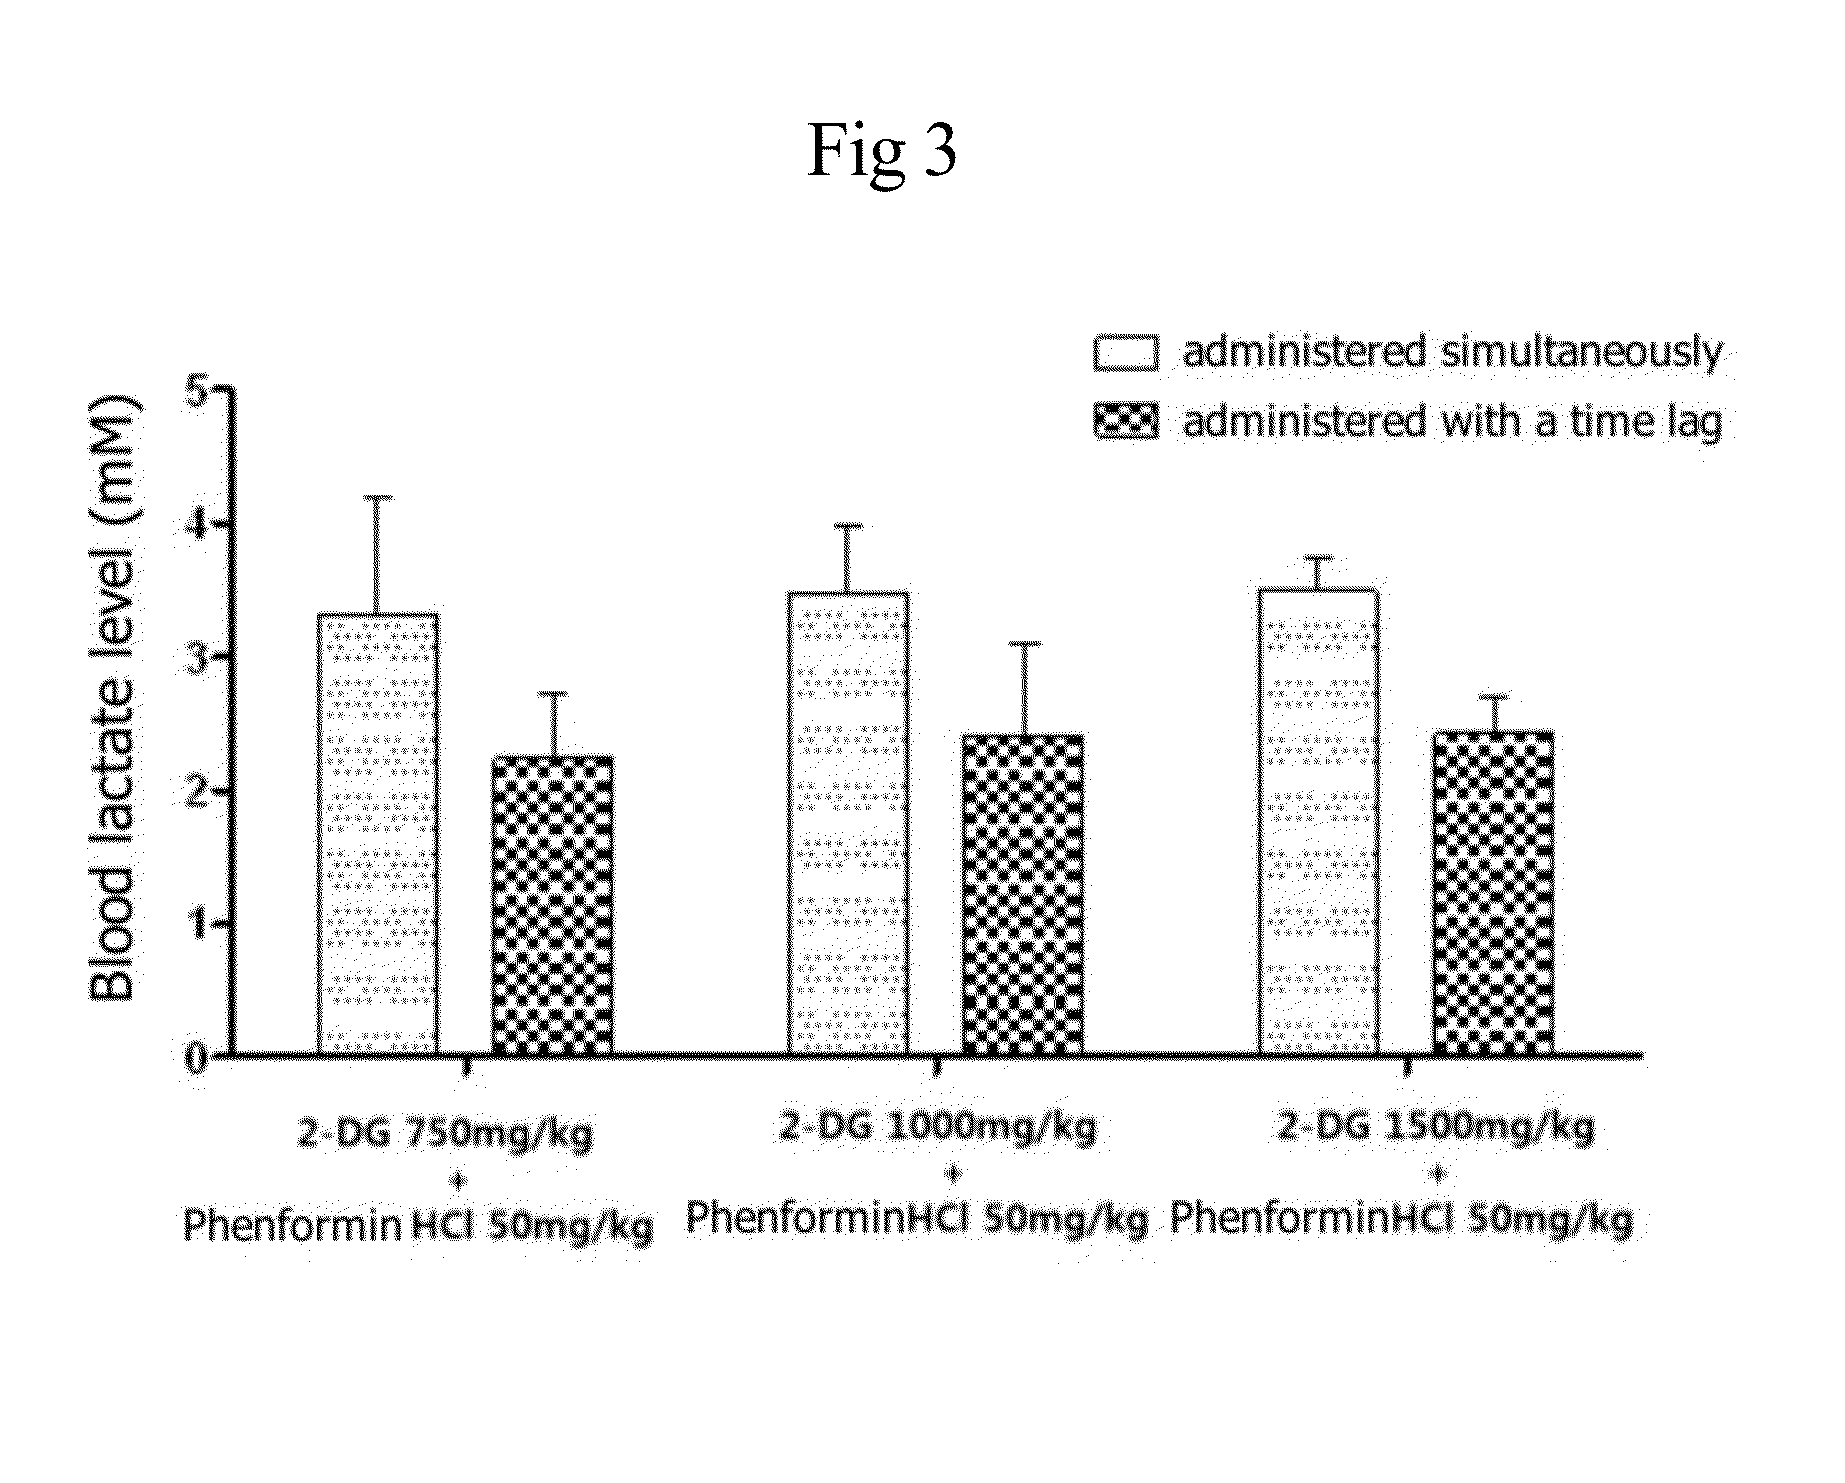 Anti-cancer pharmaceutical composition